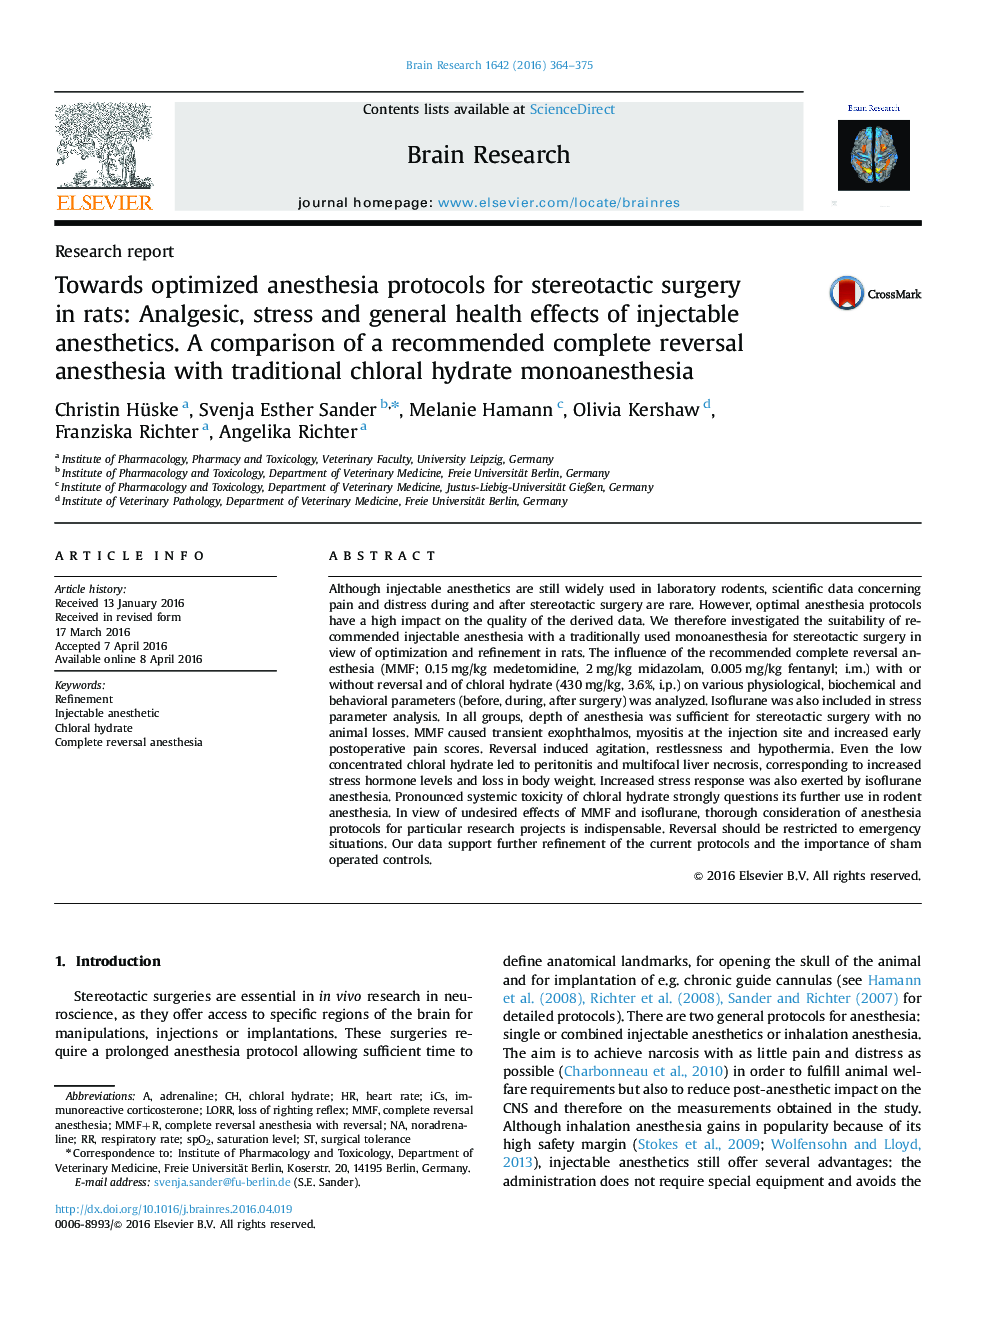 Towards optimized anesthesia protocols for stereotactic surgery in rats: Analgesic, stress and general health effects of injectable anesthetics. A comparison of a recommended complete reversal anesthesia with traditional chloral hydrate monoanesthesia